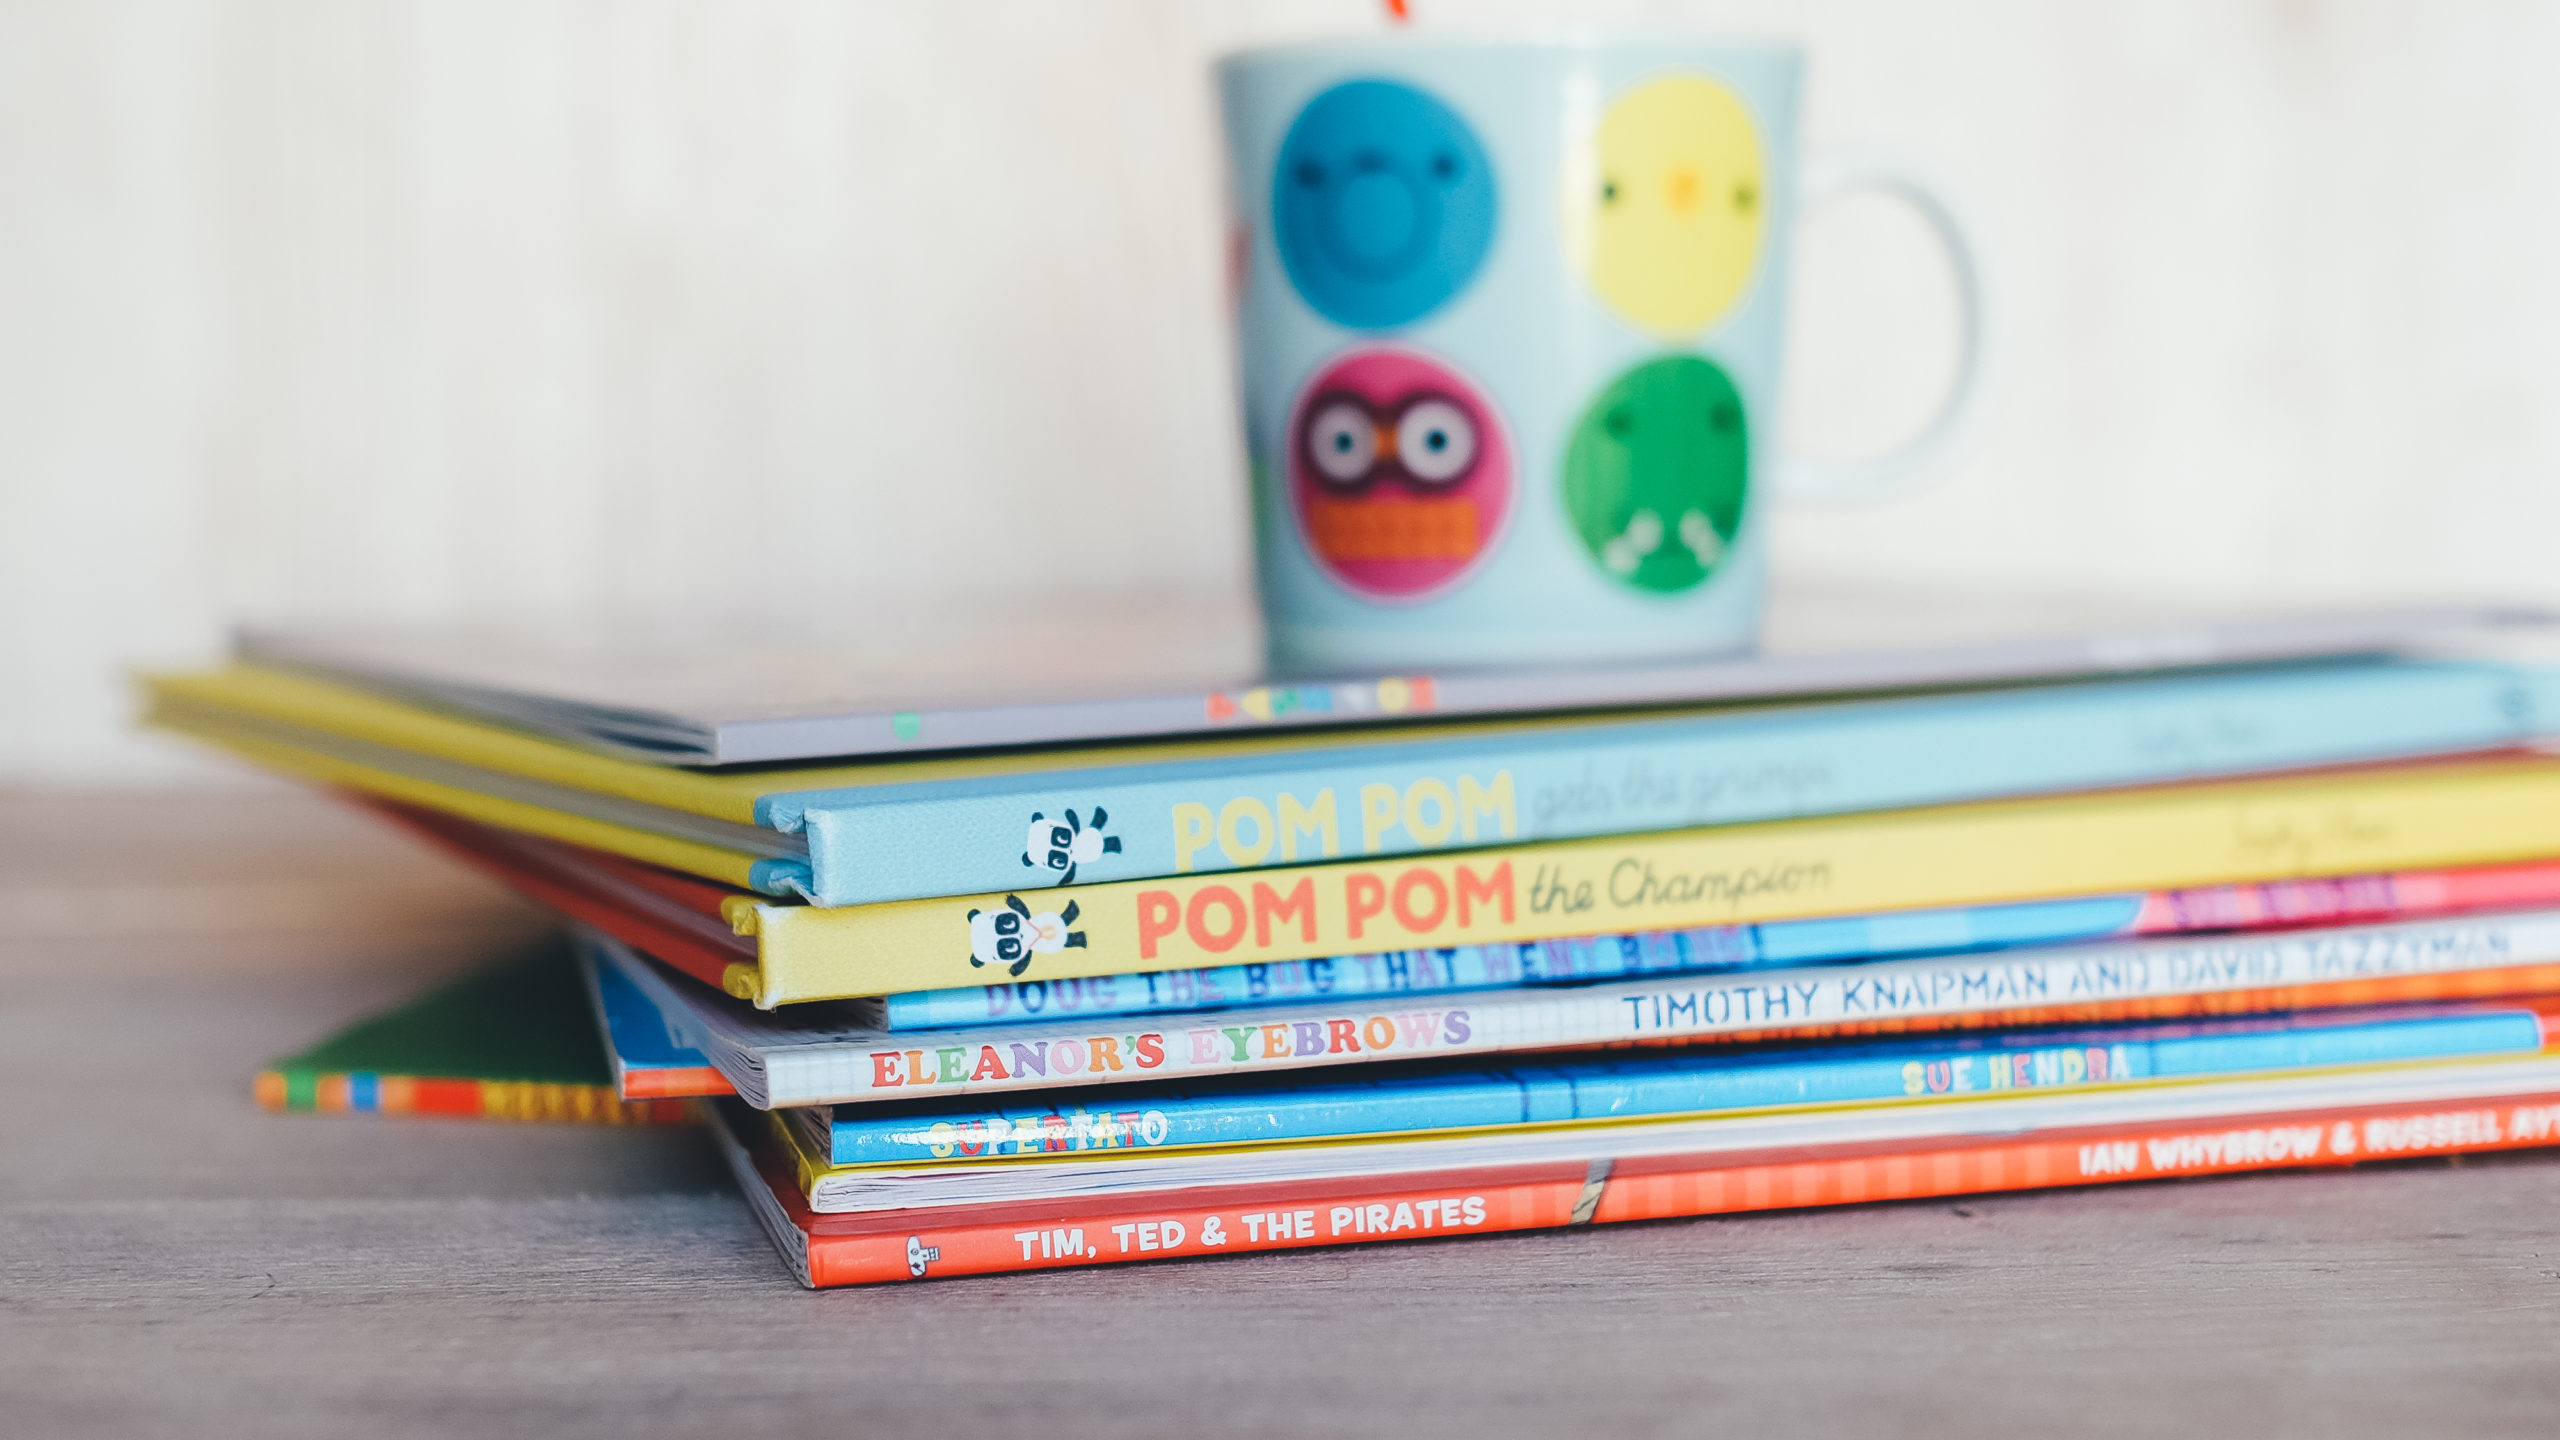 Read To Little Kids Throughout The Day, Not Just At Bedtime 